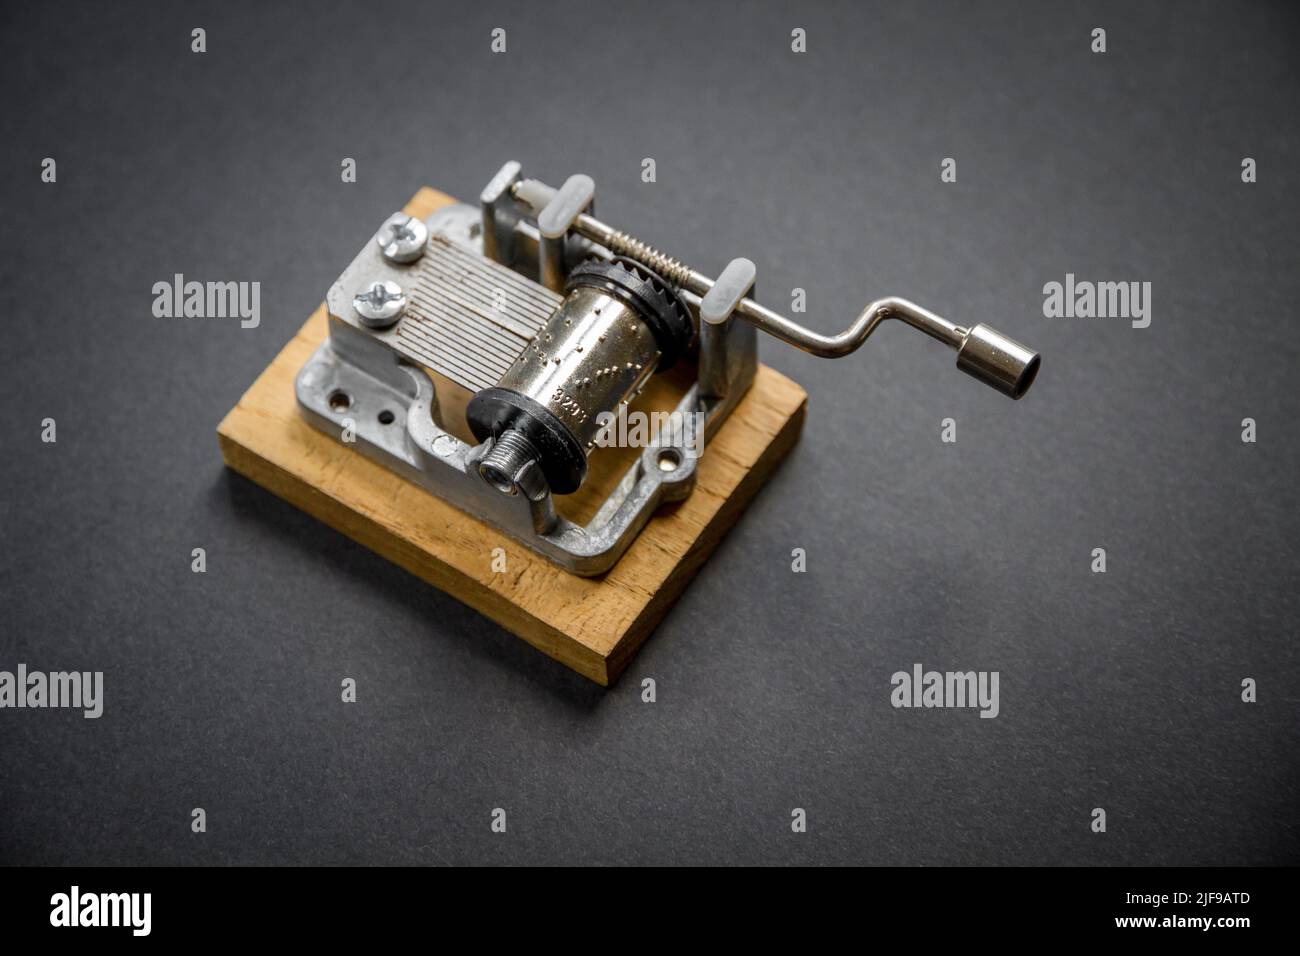 Traditional music box isolated on black background Stock Photo